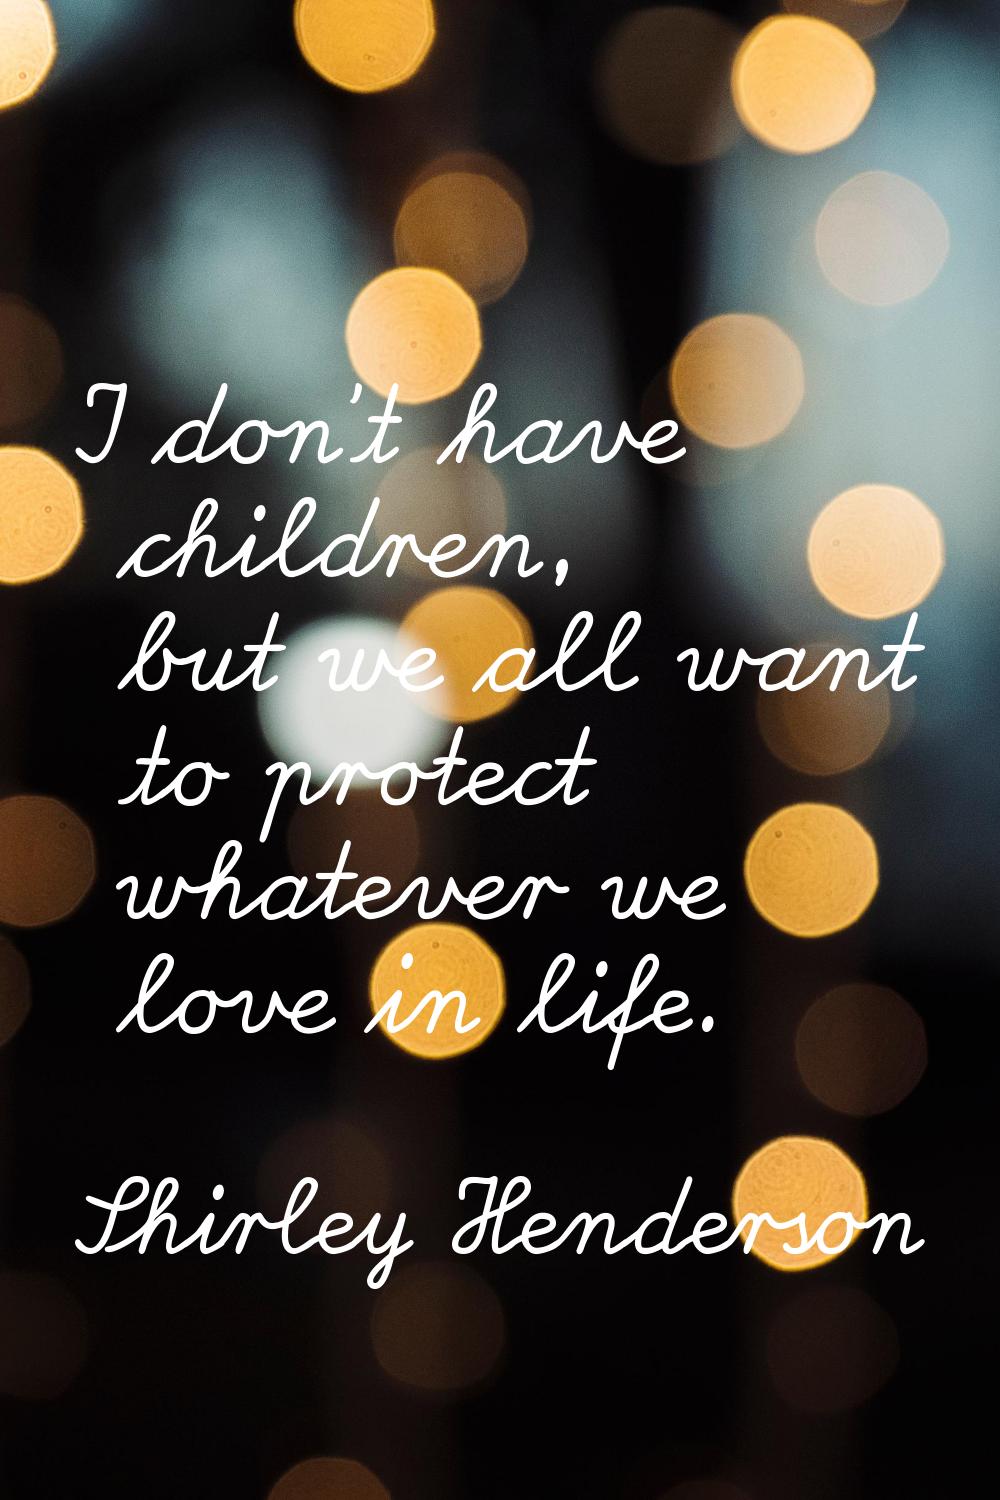 I don't have children, but we all want to protect whatever we love in life.